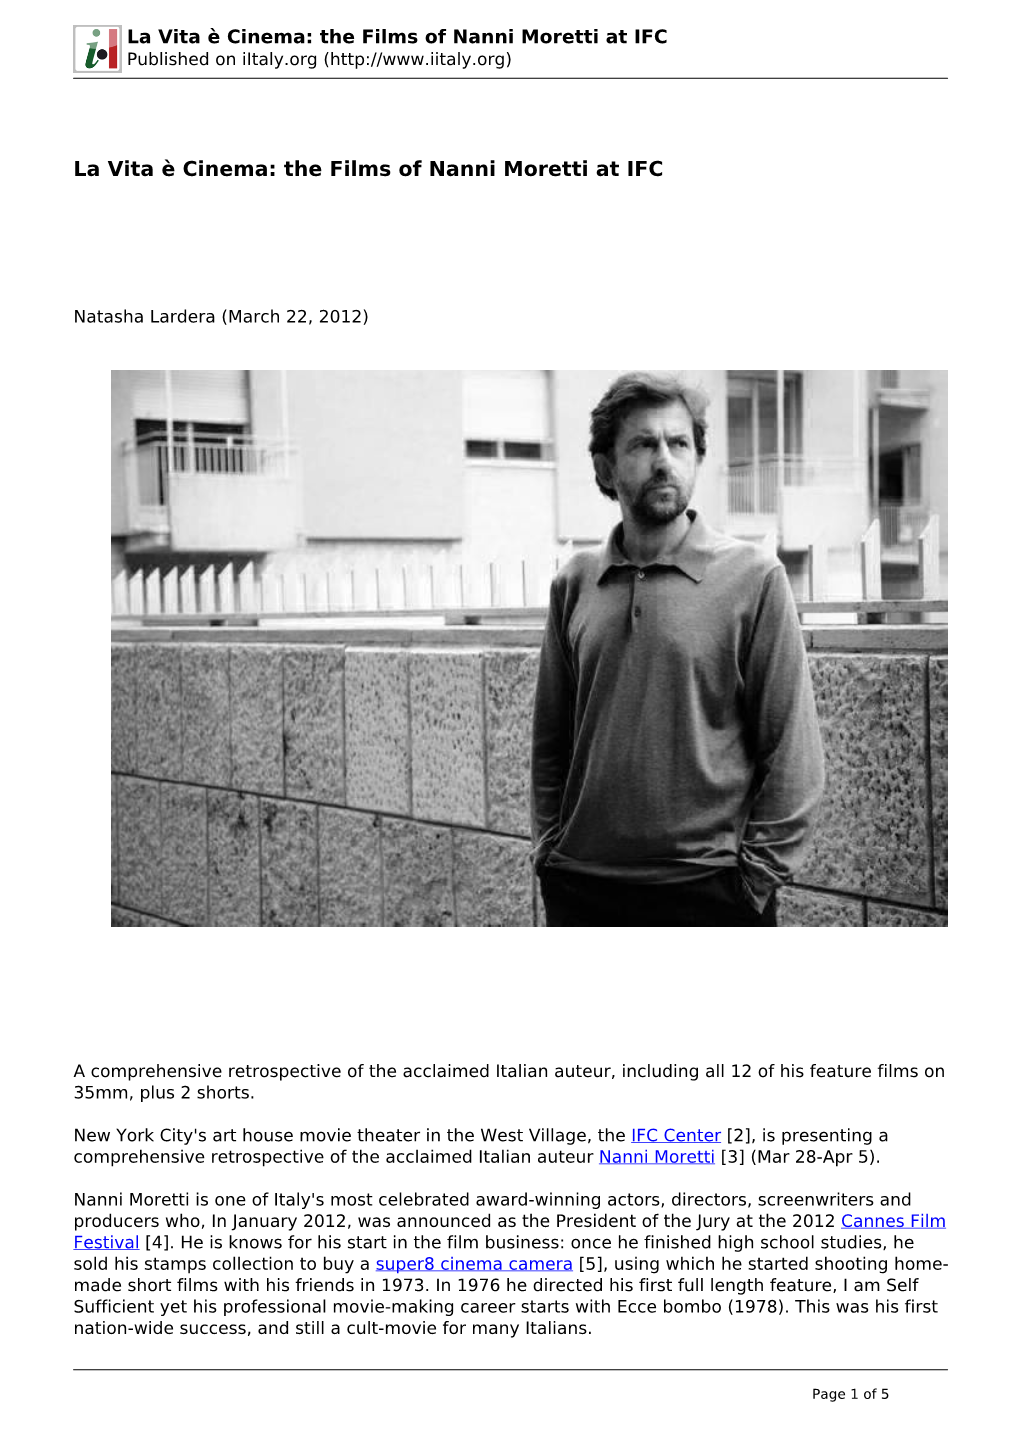 The Films of Nanni Moretti at IFC Published on Iitaly.Org (